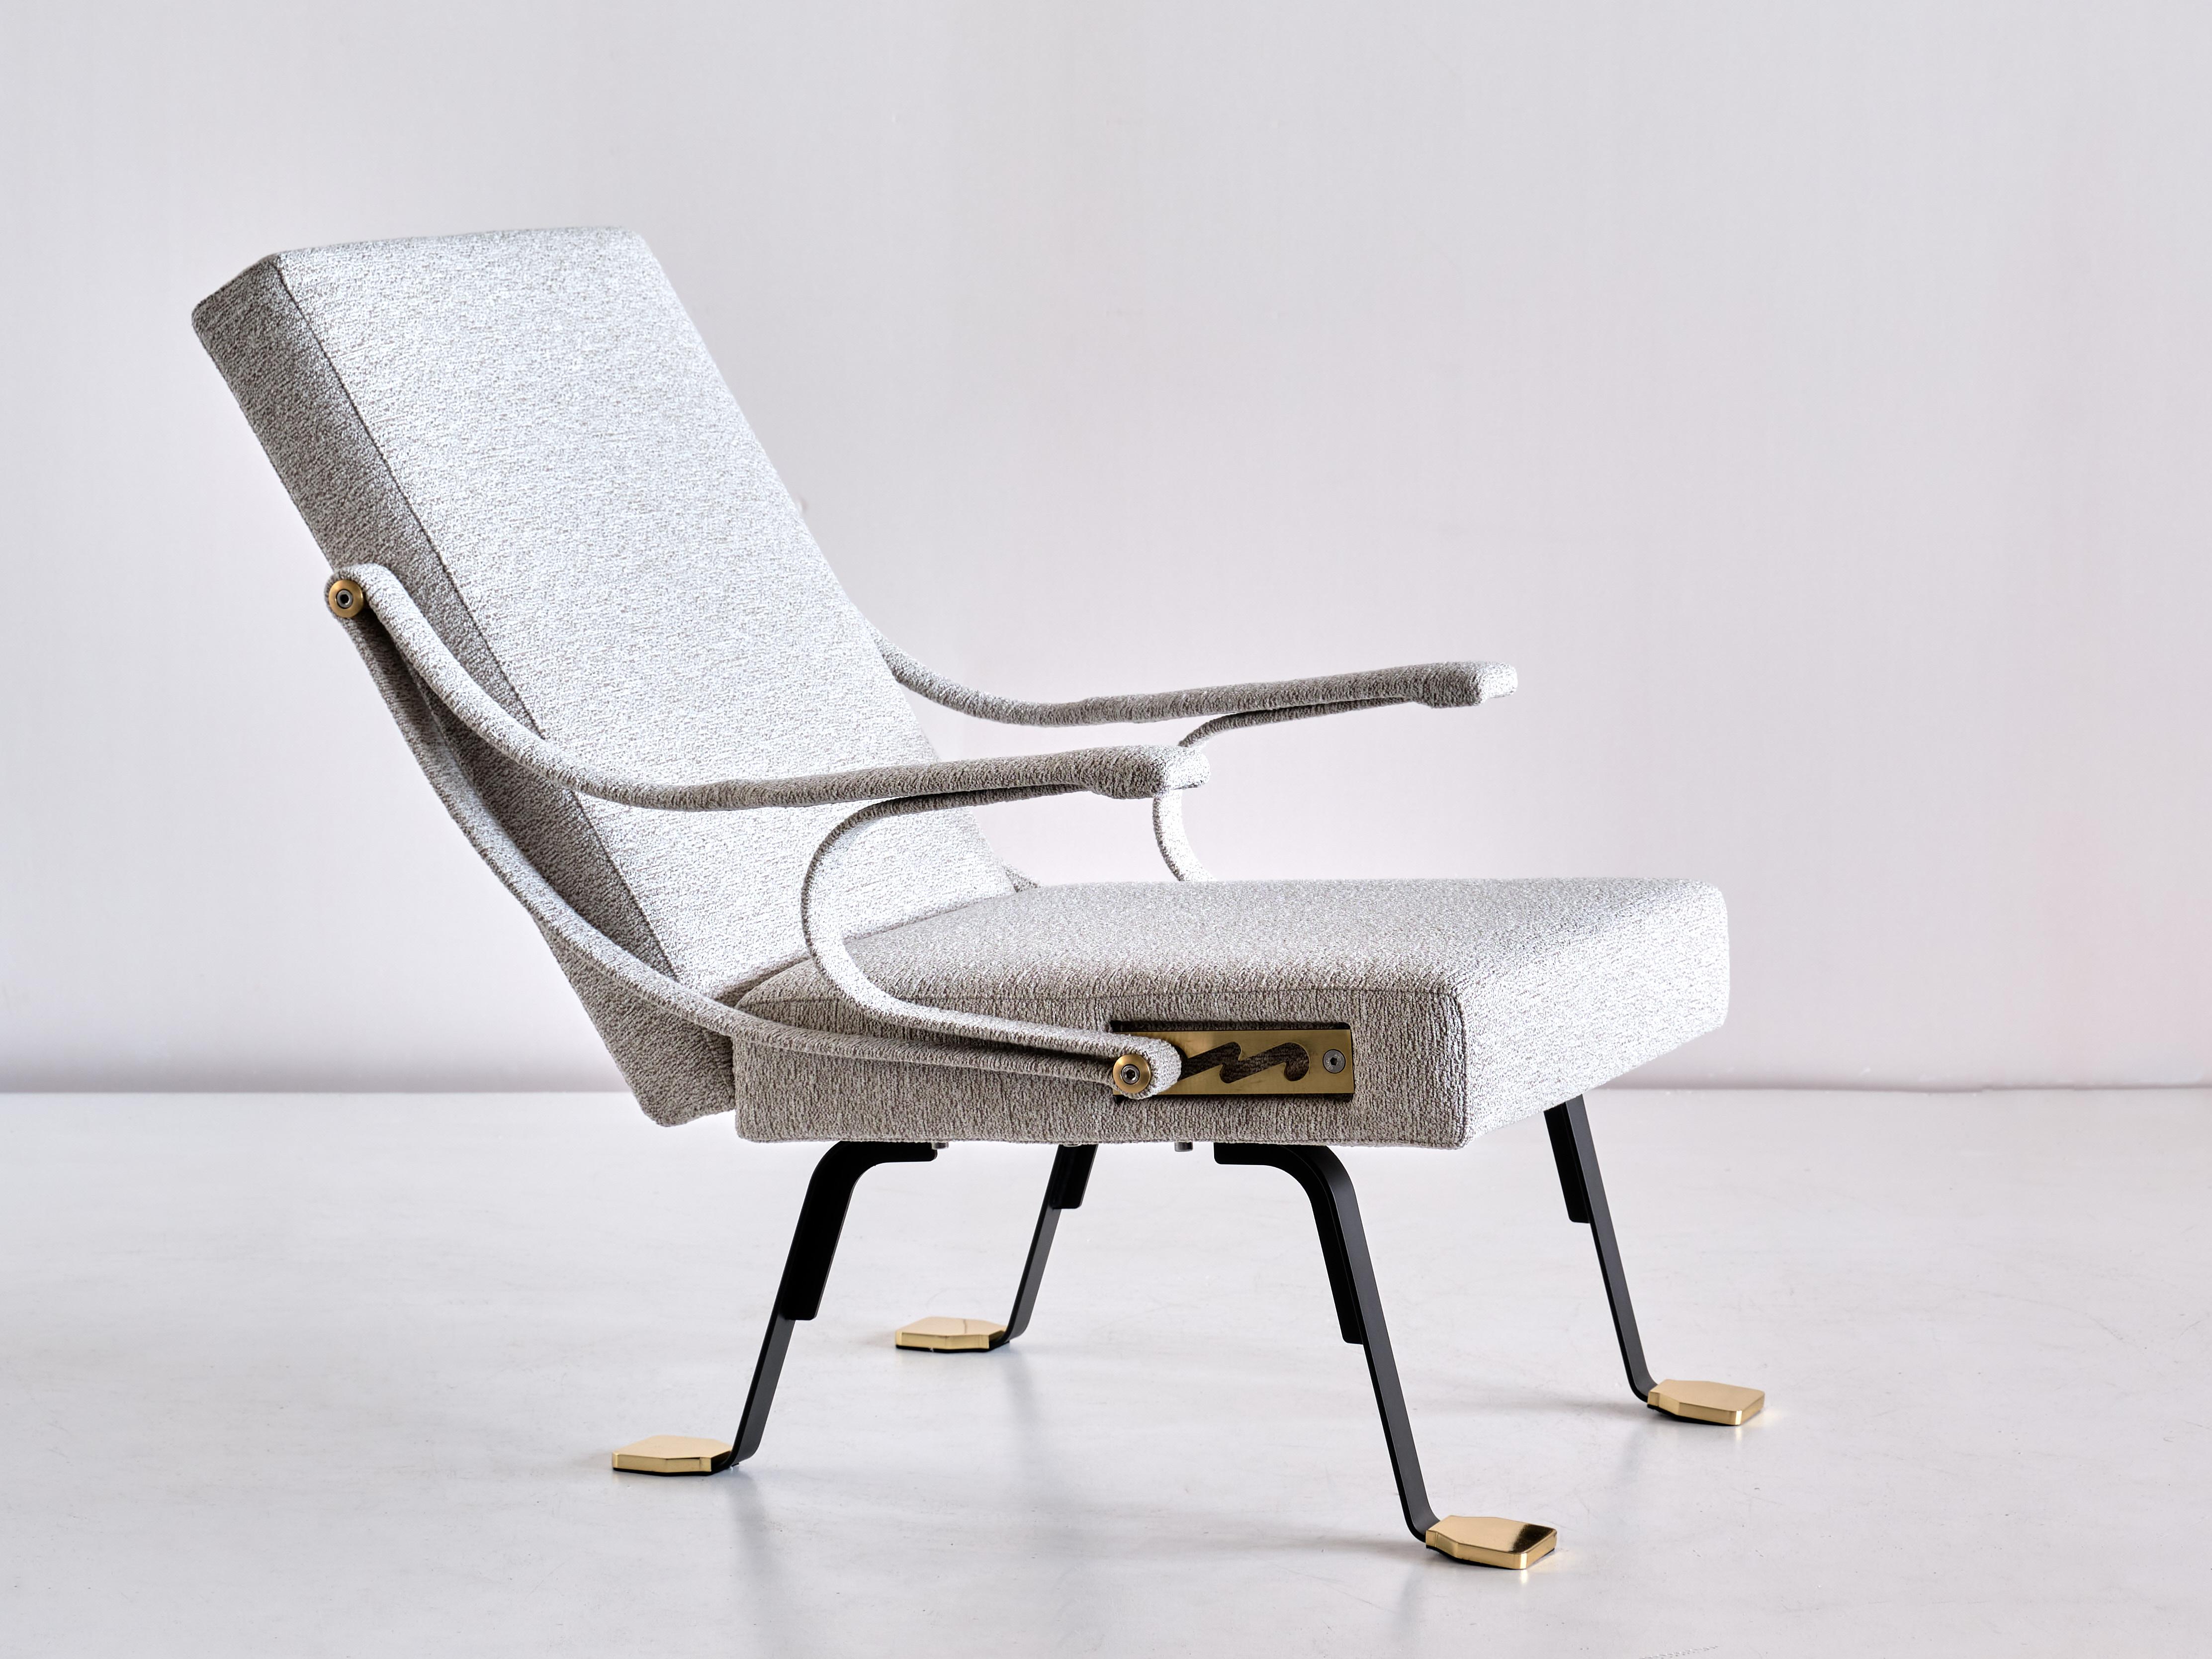 Metal Ignazio Gardella 'Digamma' Armchair in Ivory Lelièvre Bouclé Fabric and Brass